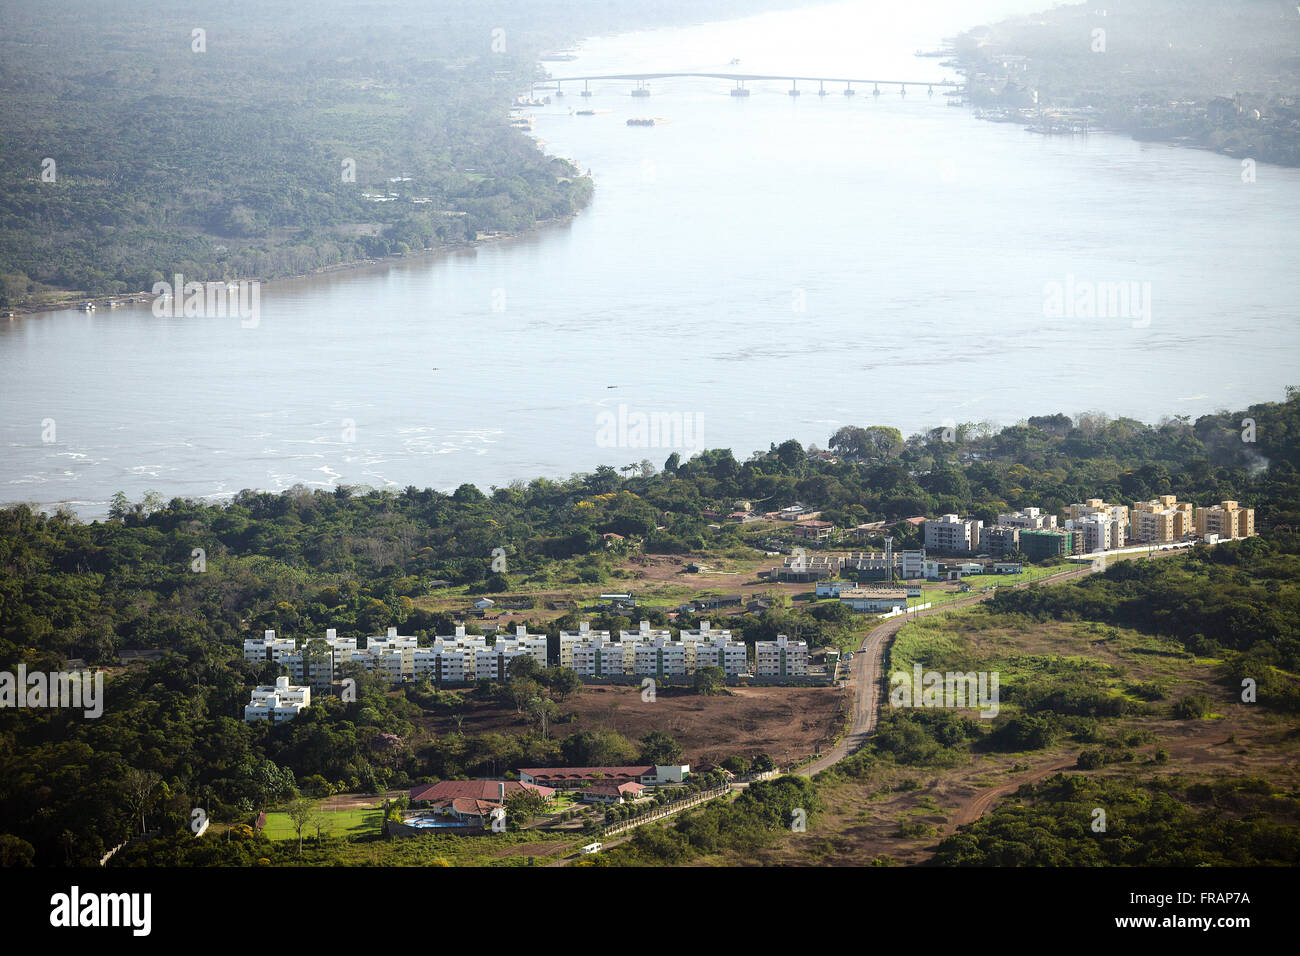 Aerial view of residential complex on the shore of the Madeira River in the Amazon region Stock Photo